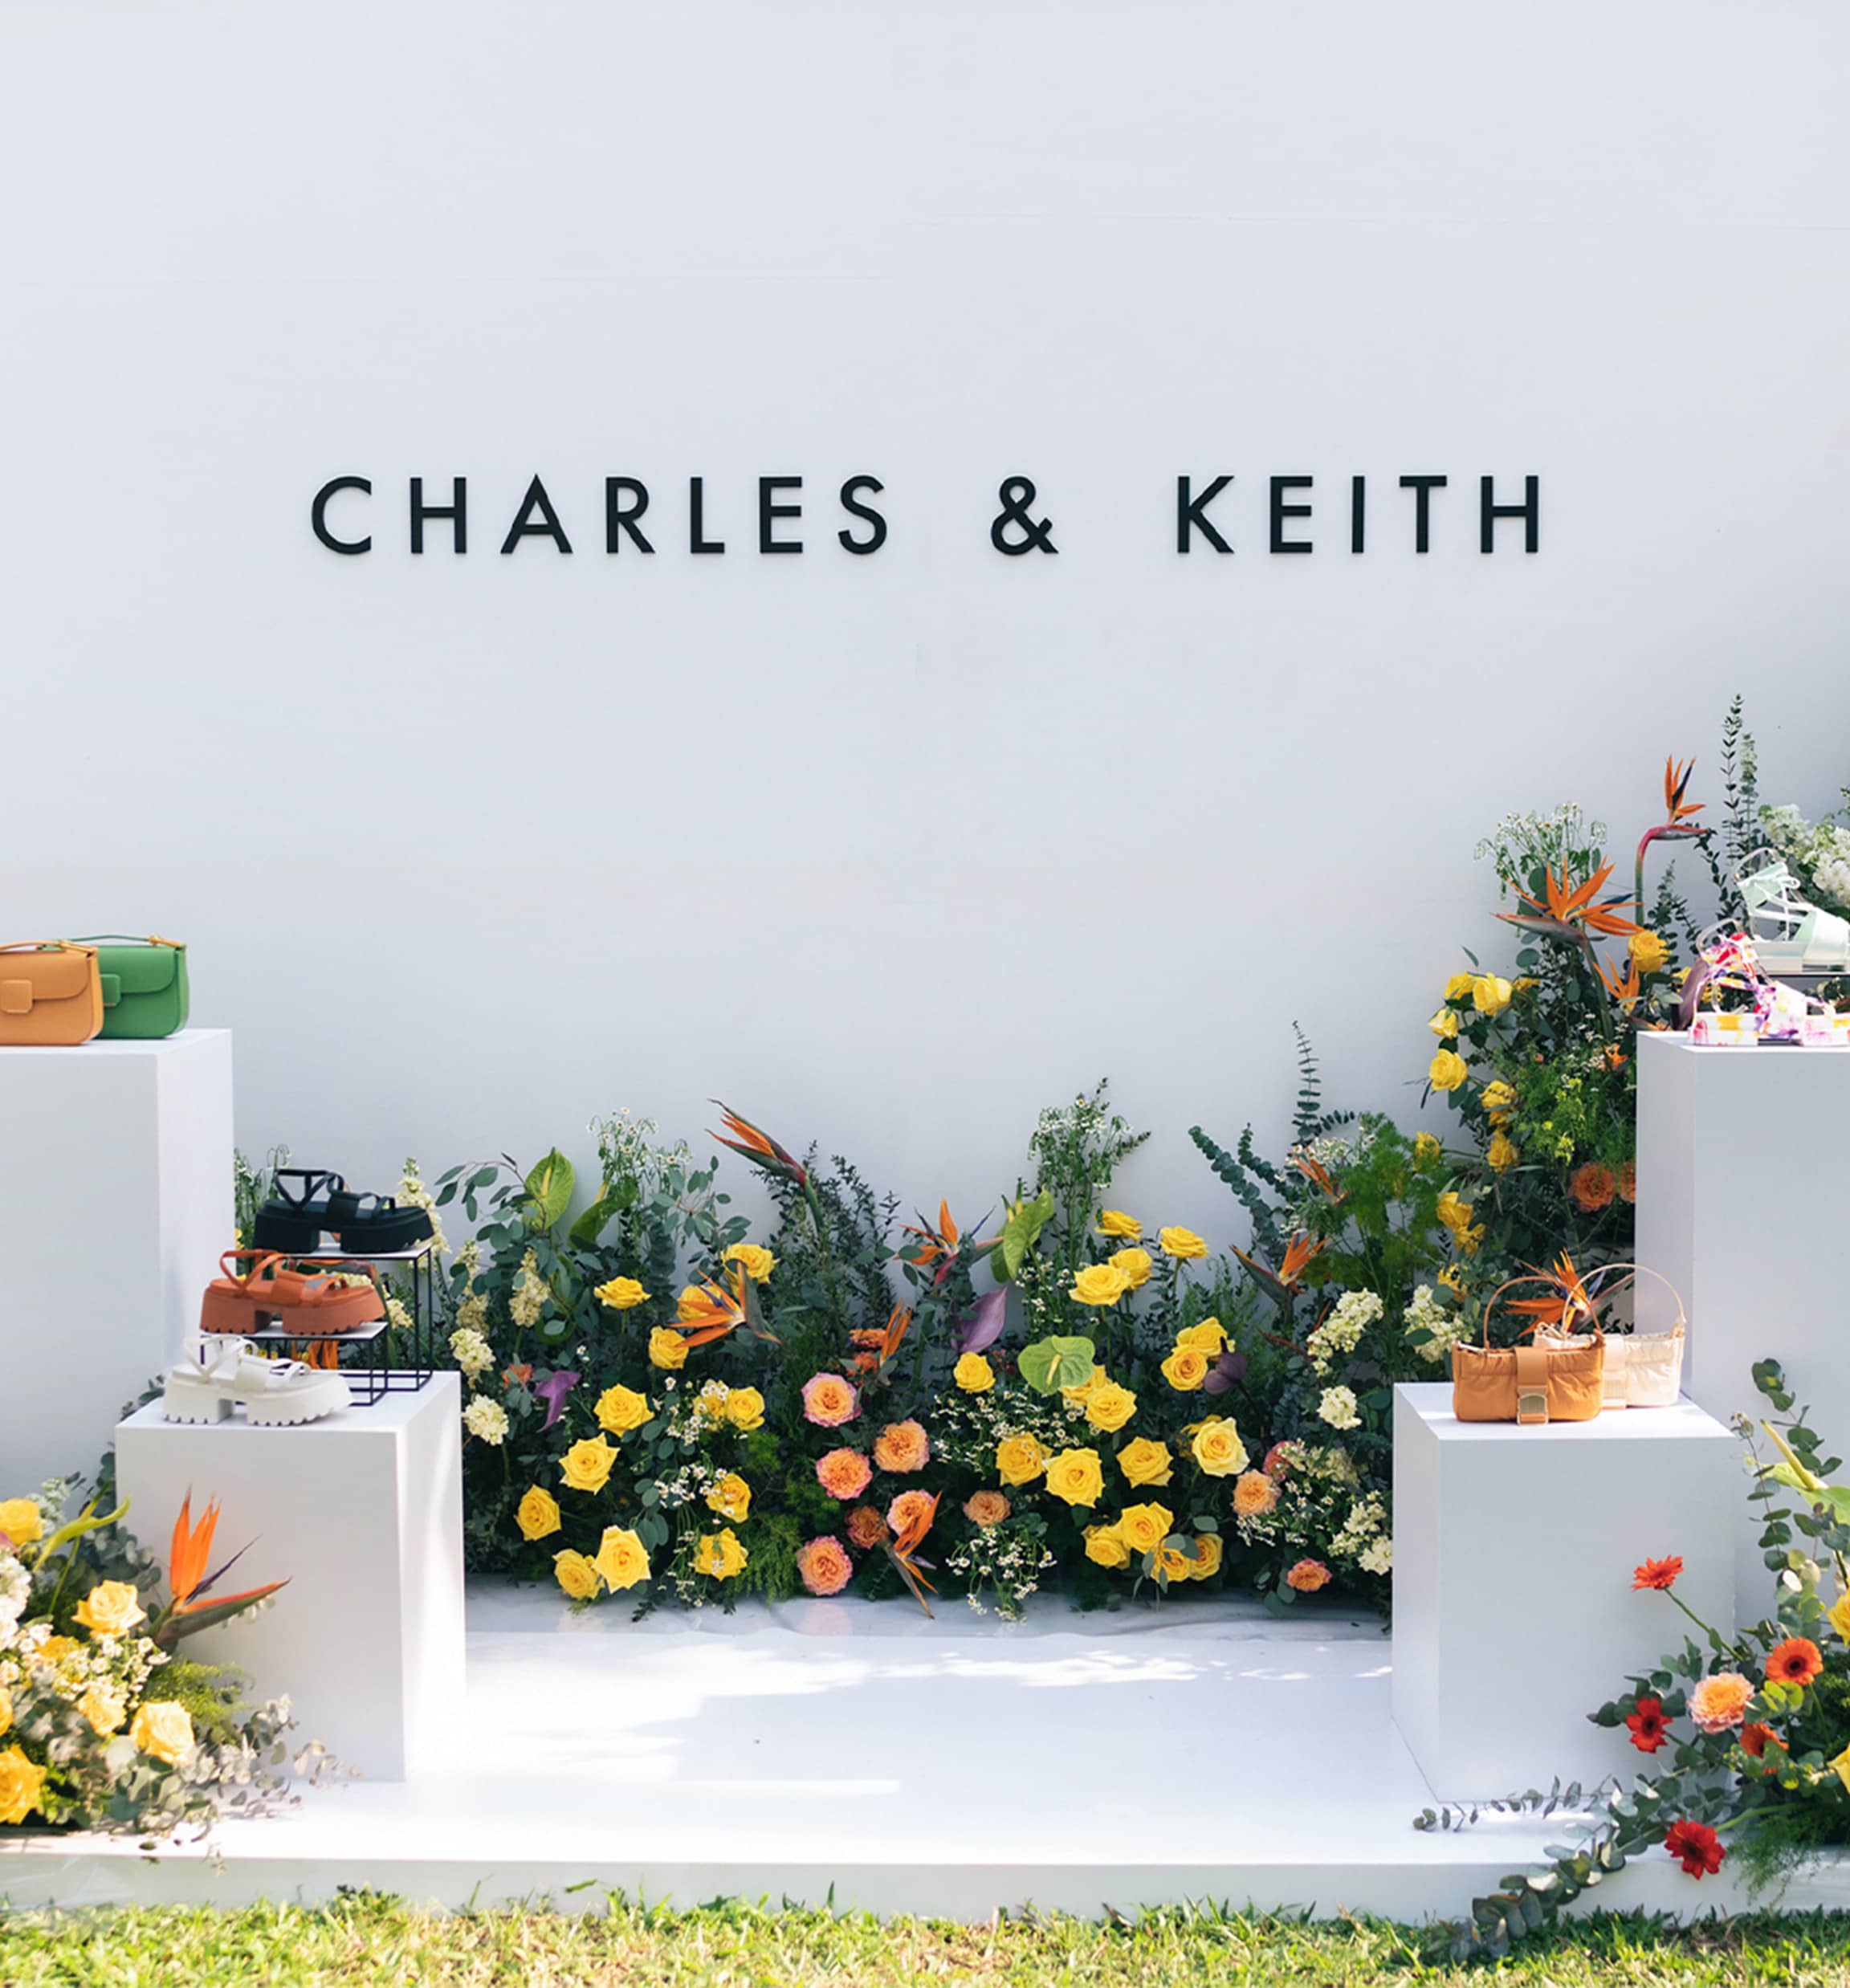 Product display at CHARLES & KEITH’s ‘Blooming Spring’ launch event in Phnom Penh, Cambodia